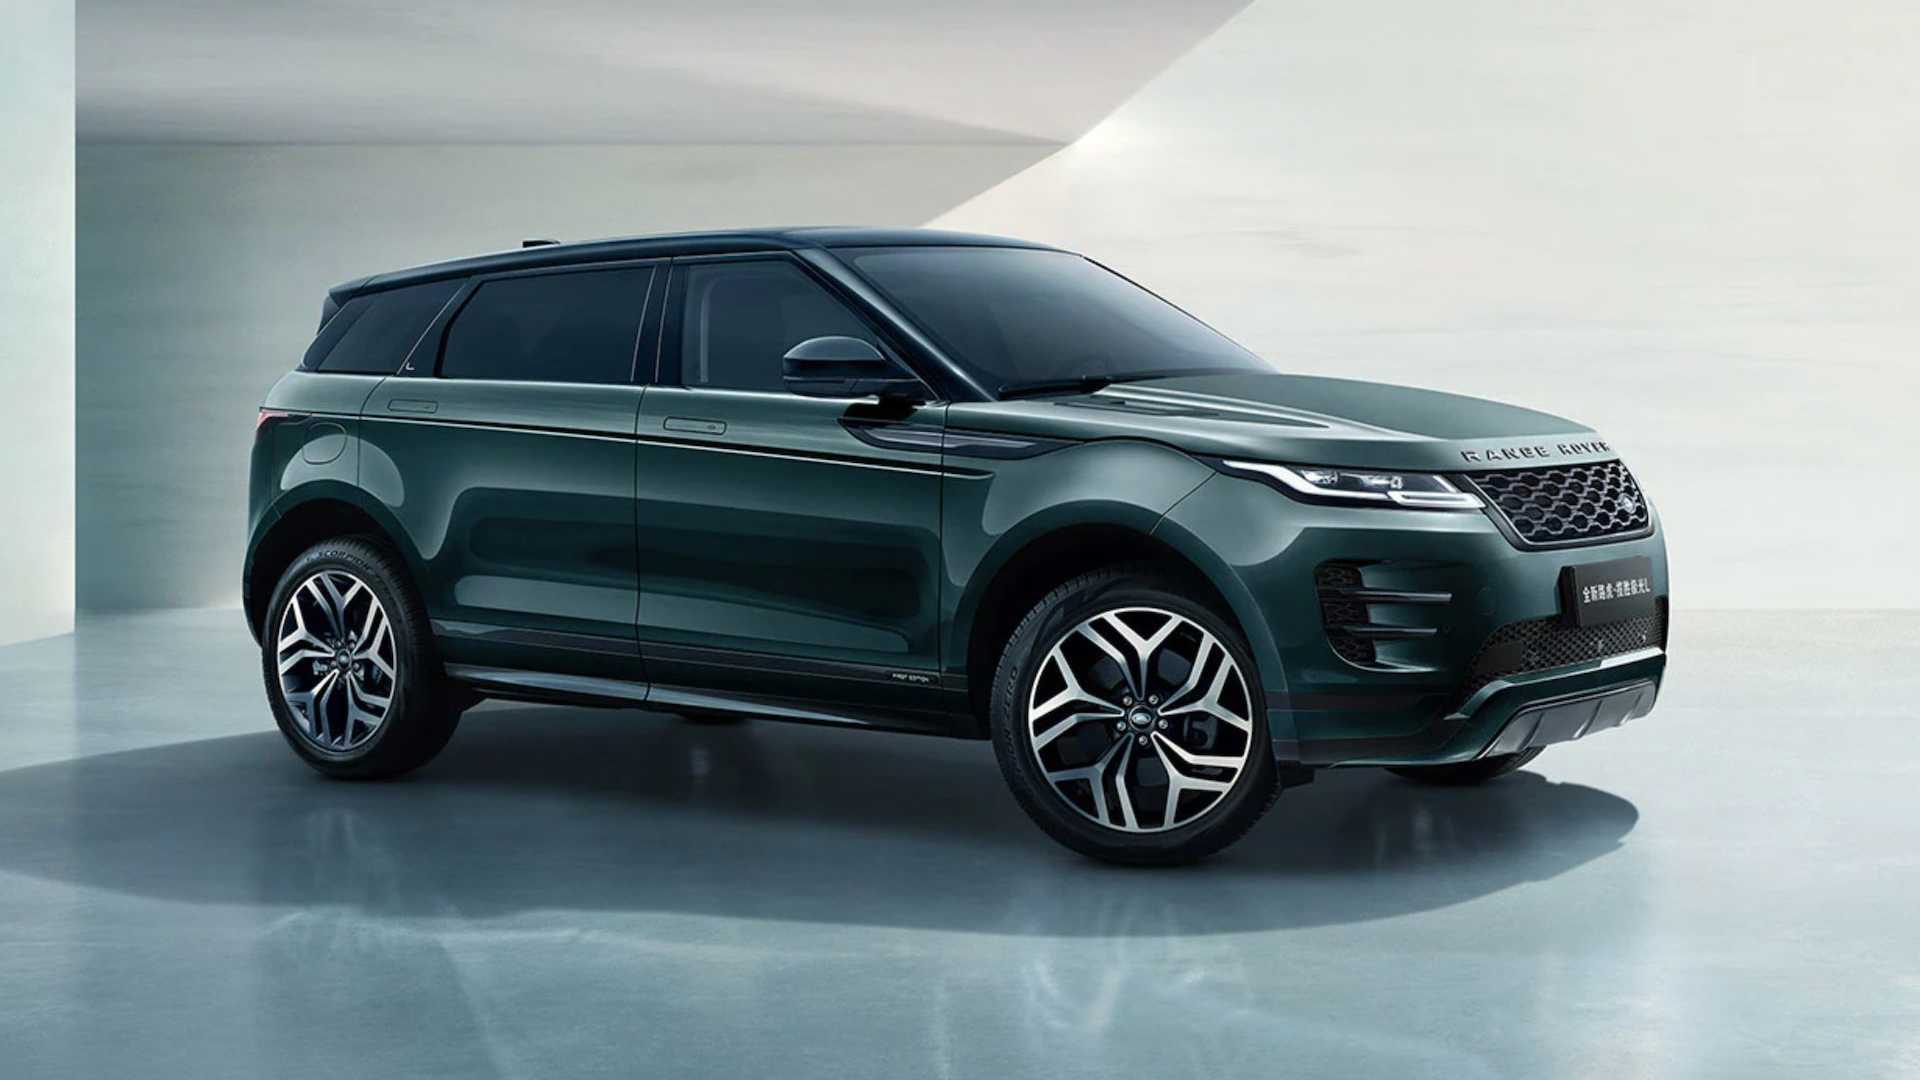 Chinese 2022 Range Rover Evoque L Revealed With TwoRow Seating